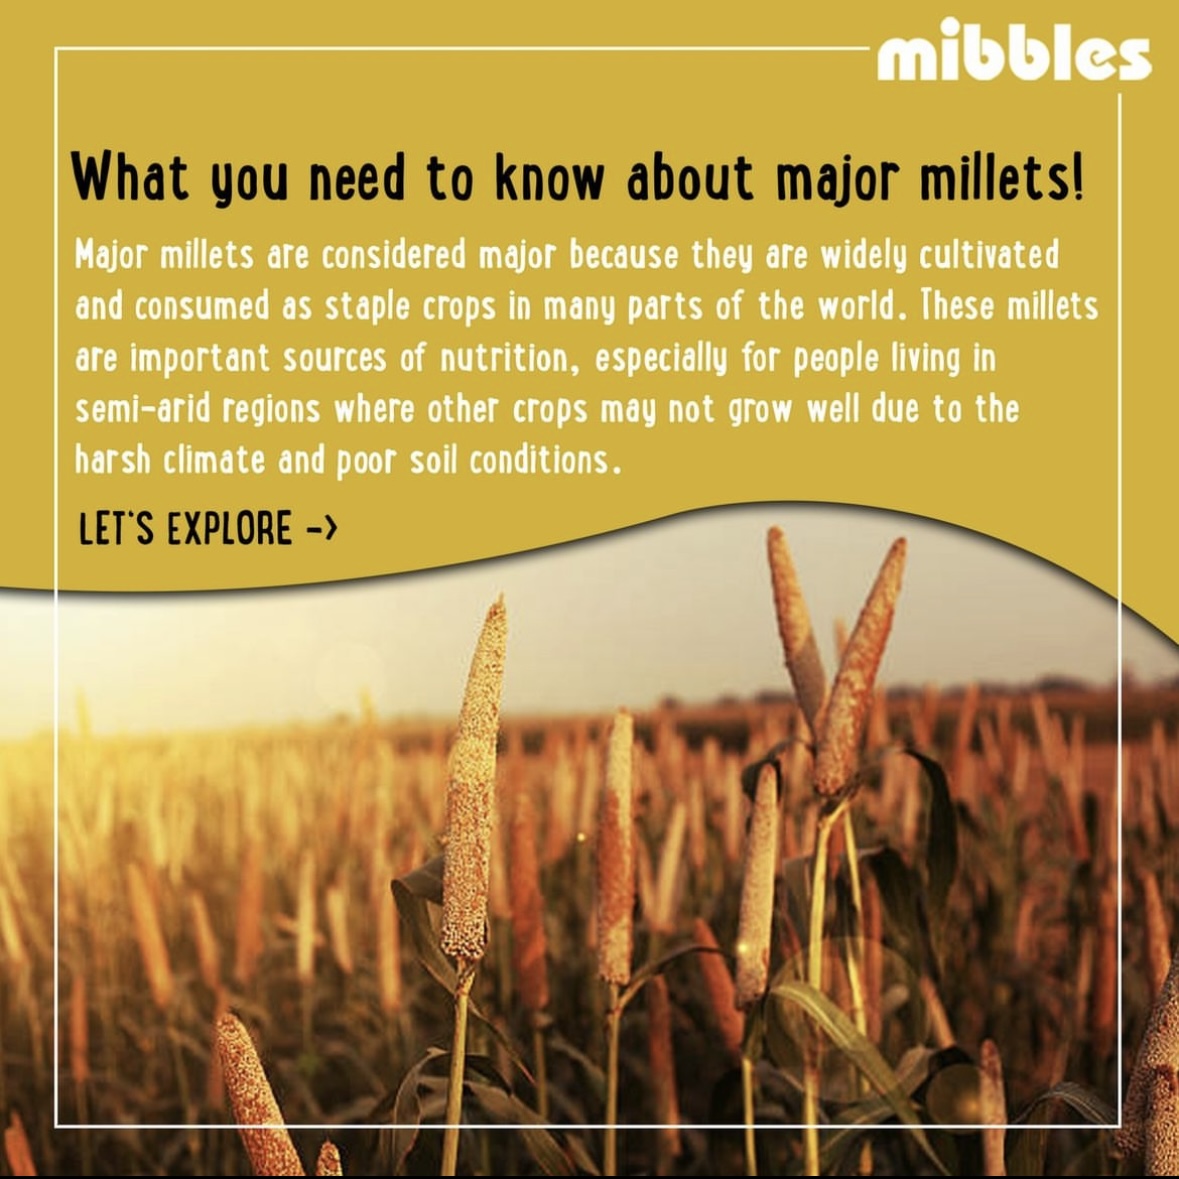 What you need to know about major millets!